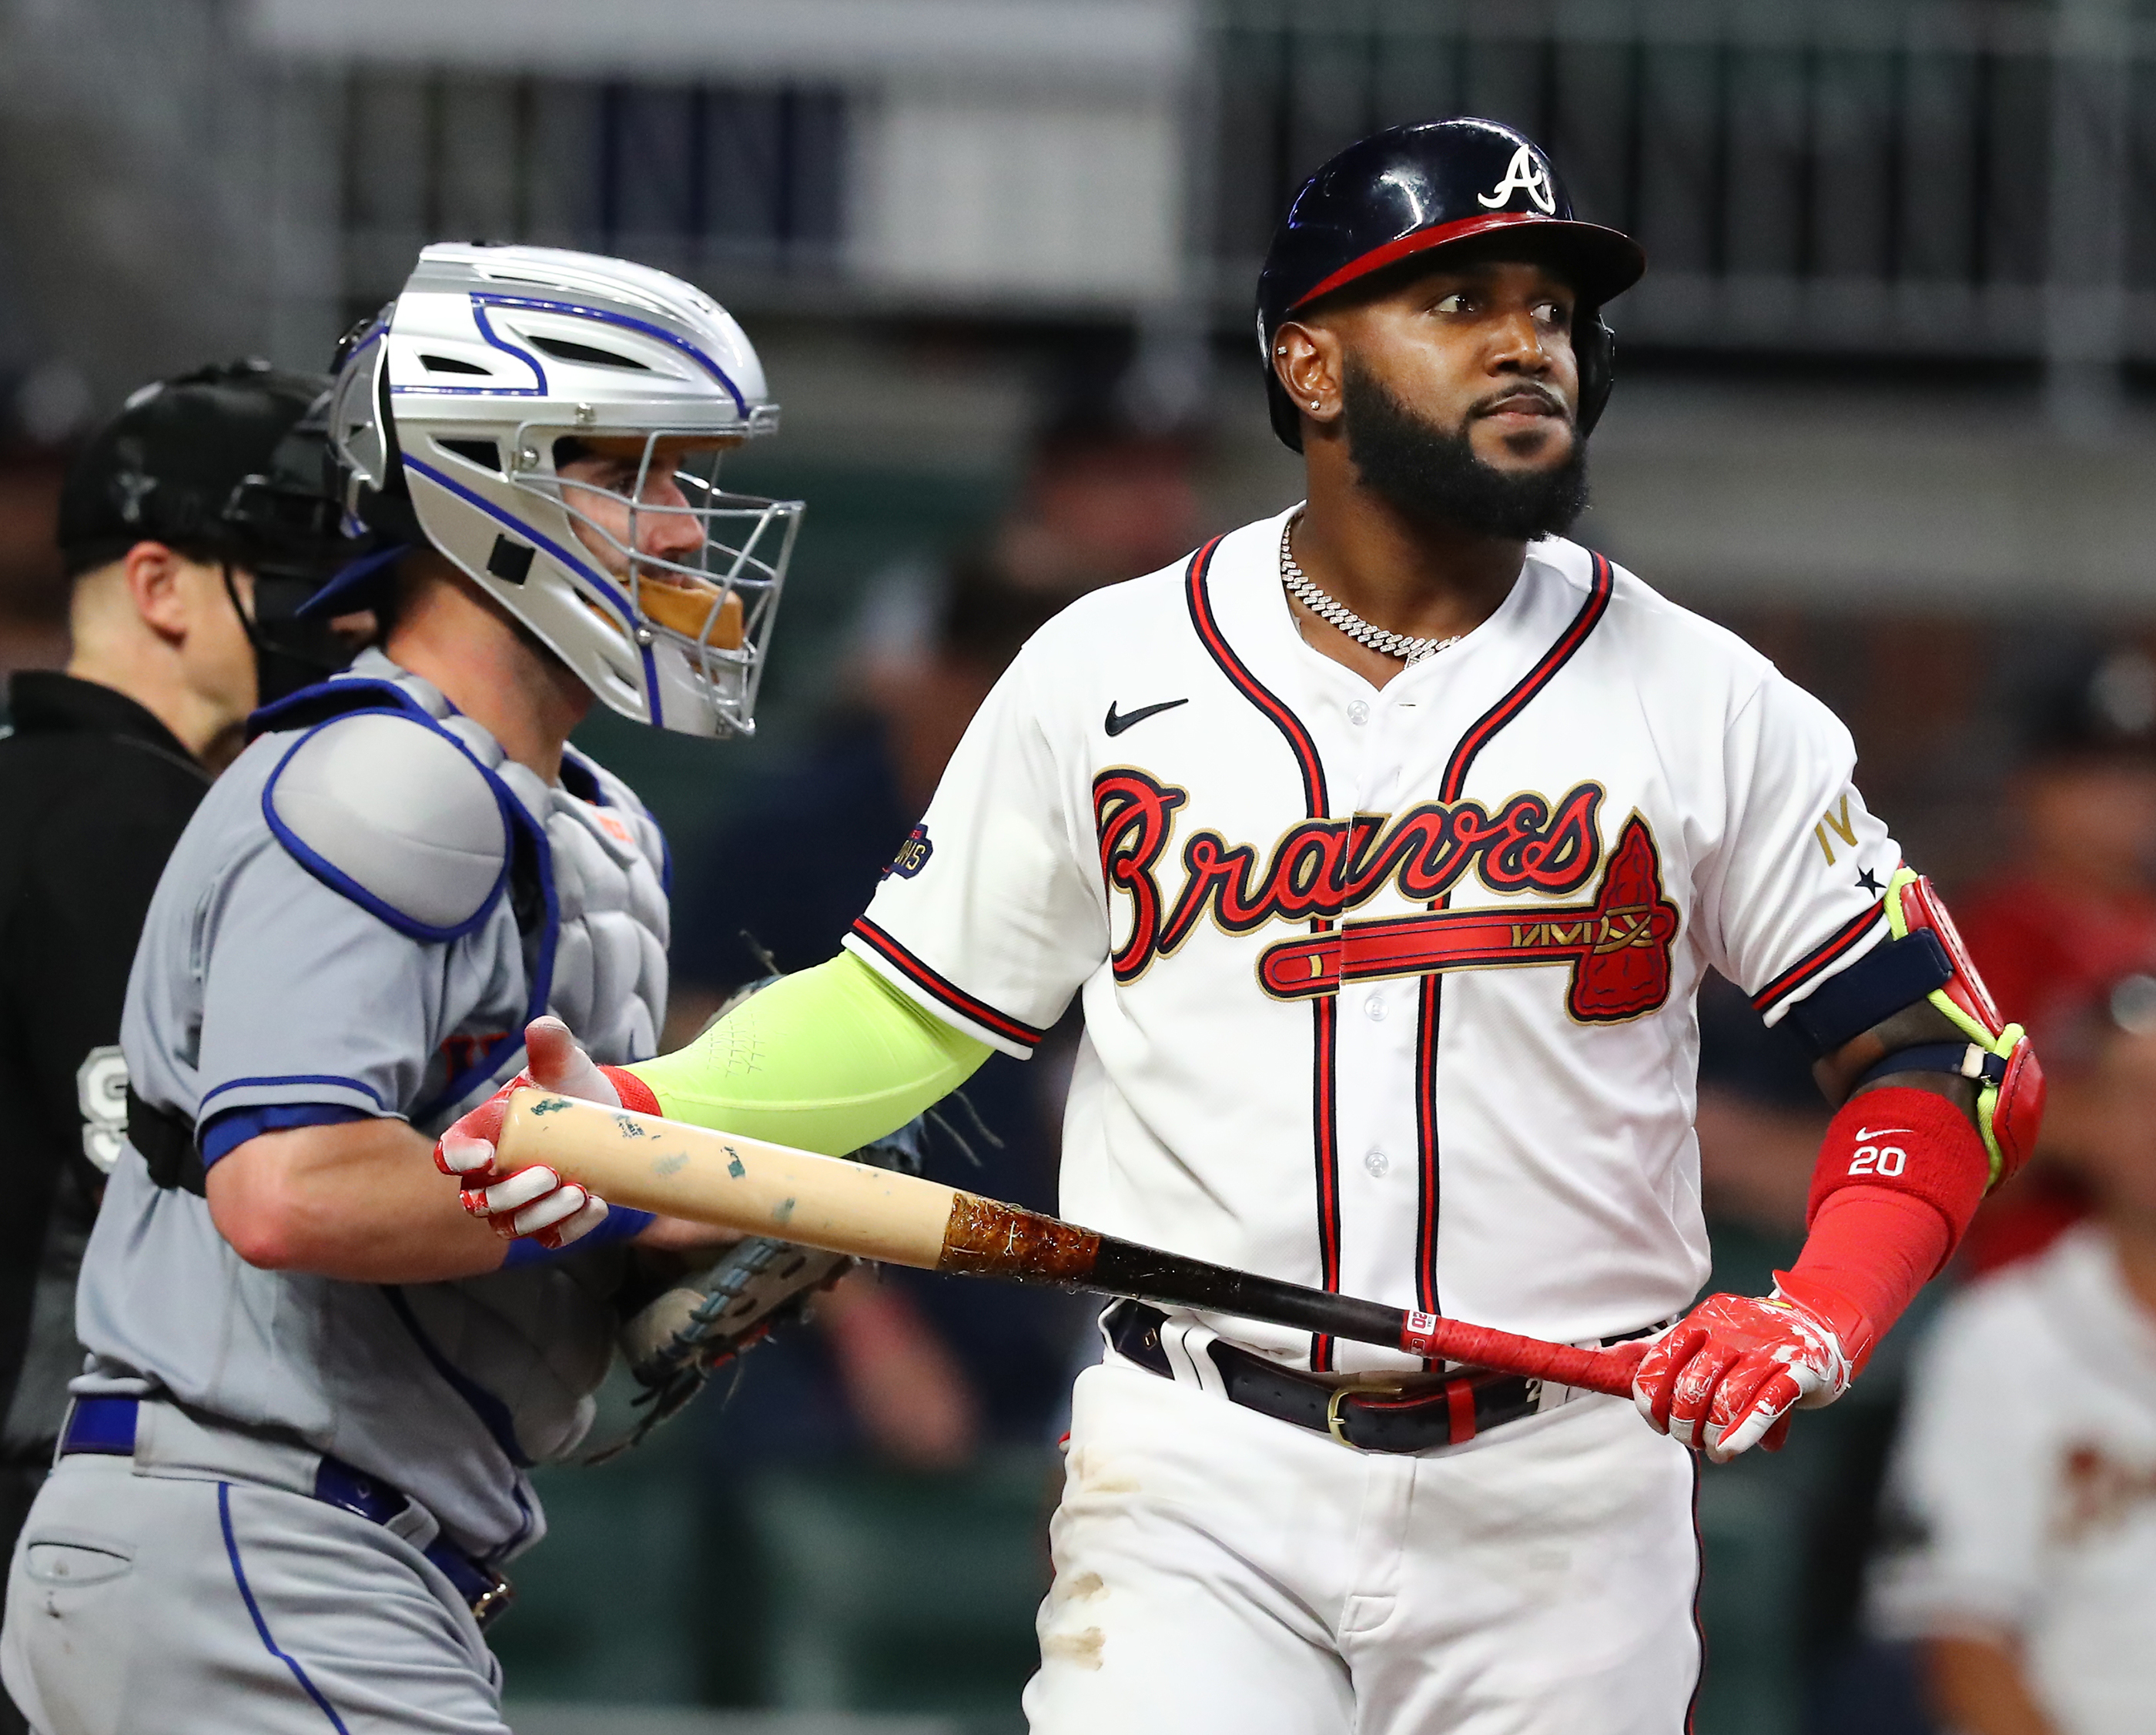 Braves outfielder Marcell Ozuna expresses disappointment after DUI